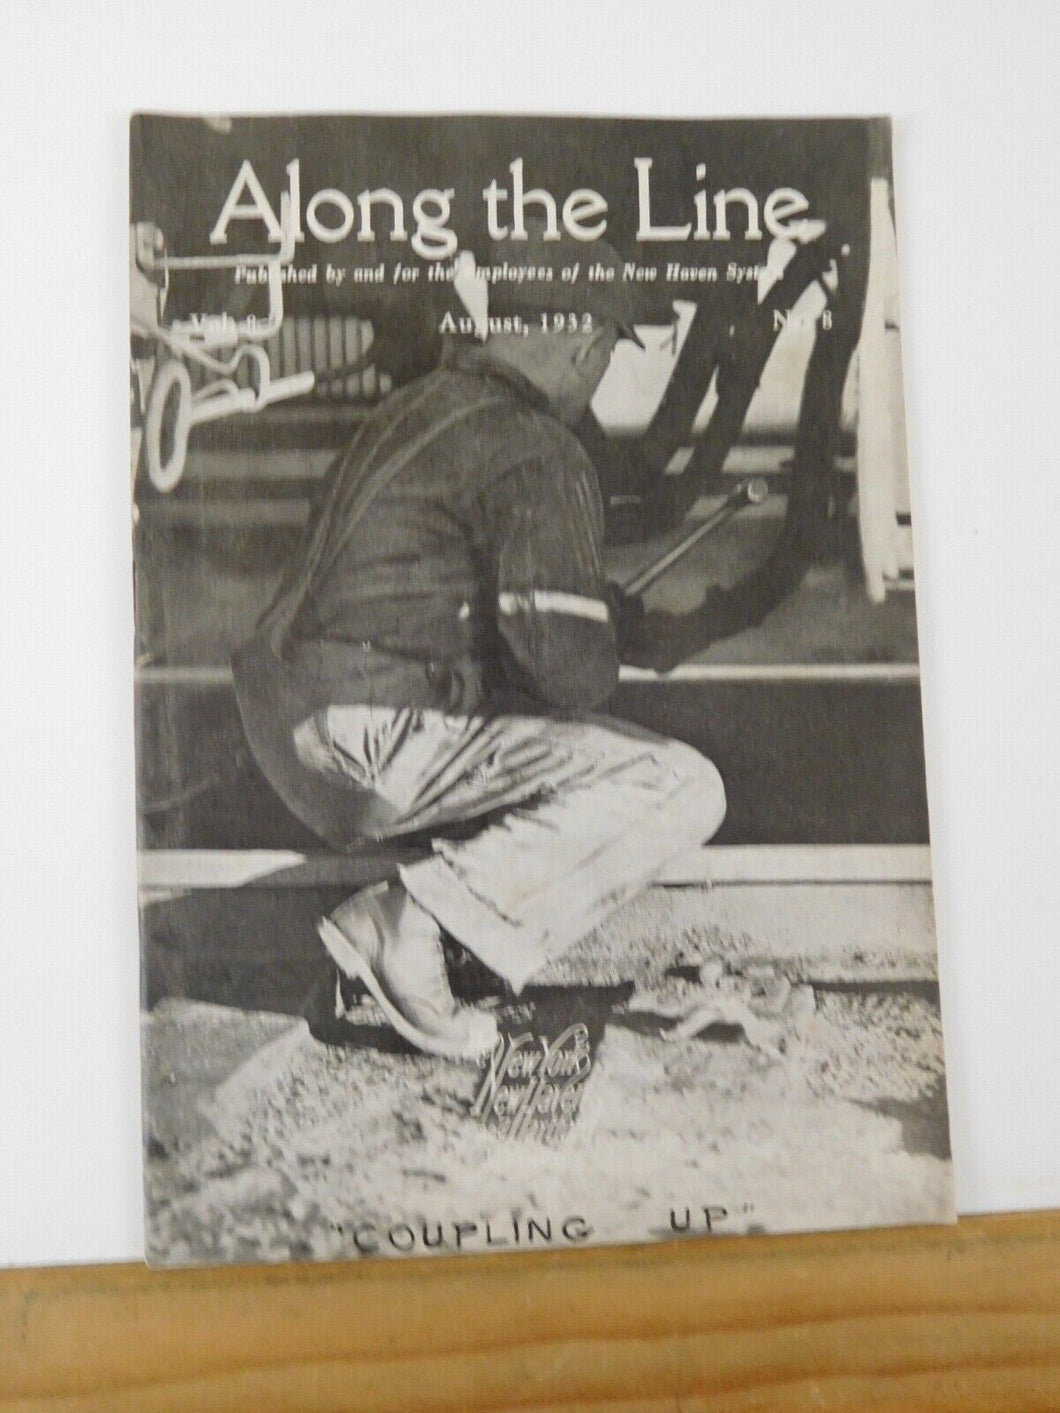 Along the Line 1932 August New York New Haven & Hartford Employee Magazine